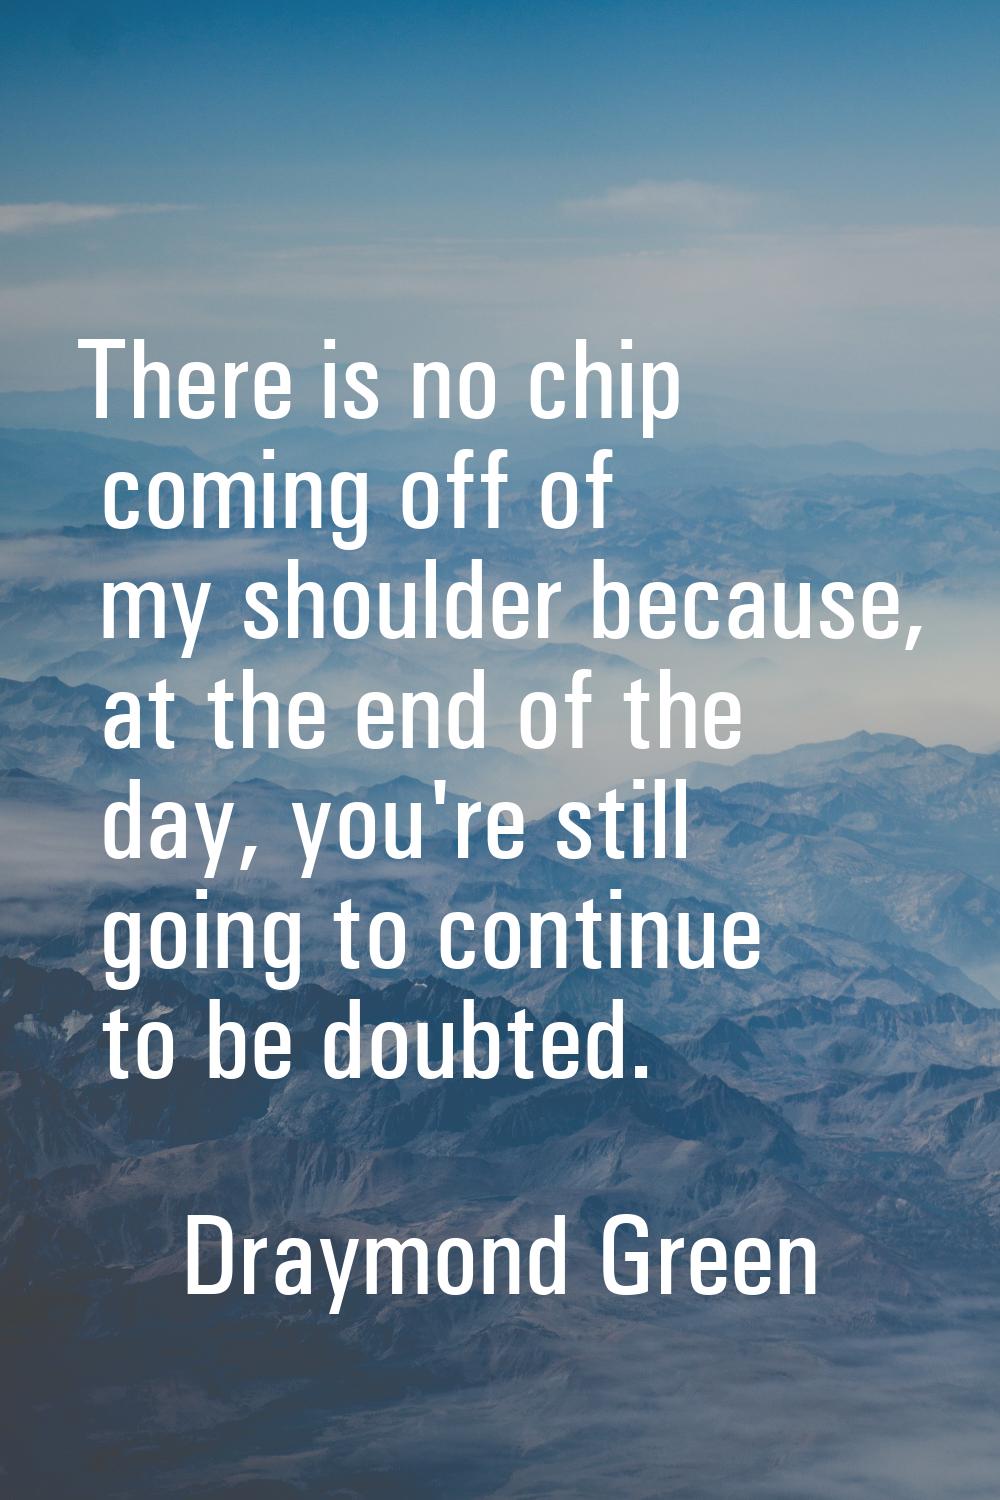 There is no chip coming off of my shoulder because, at the end of the day, you're still going to co